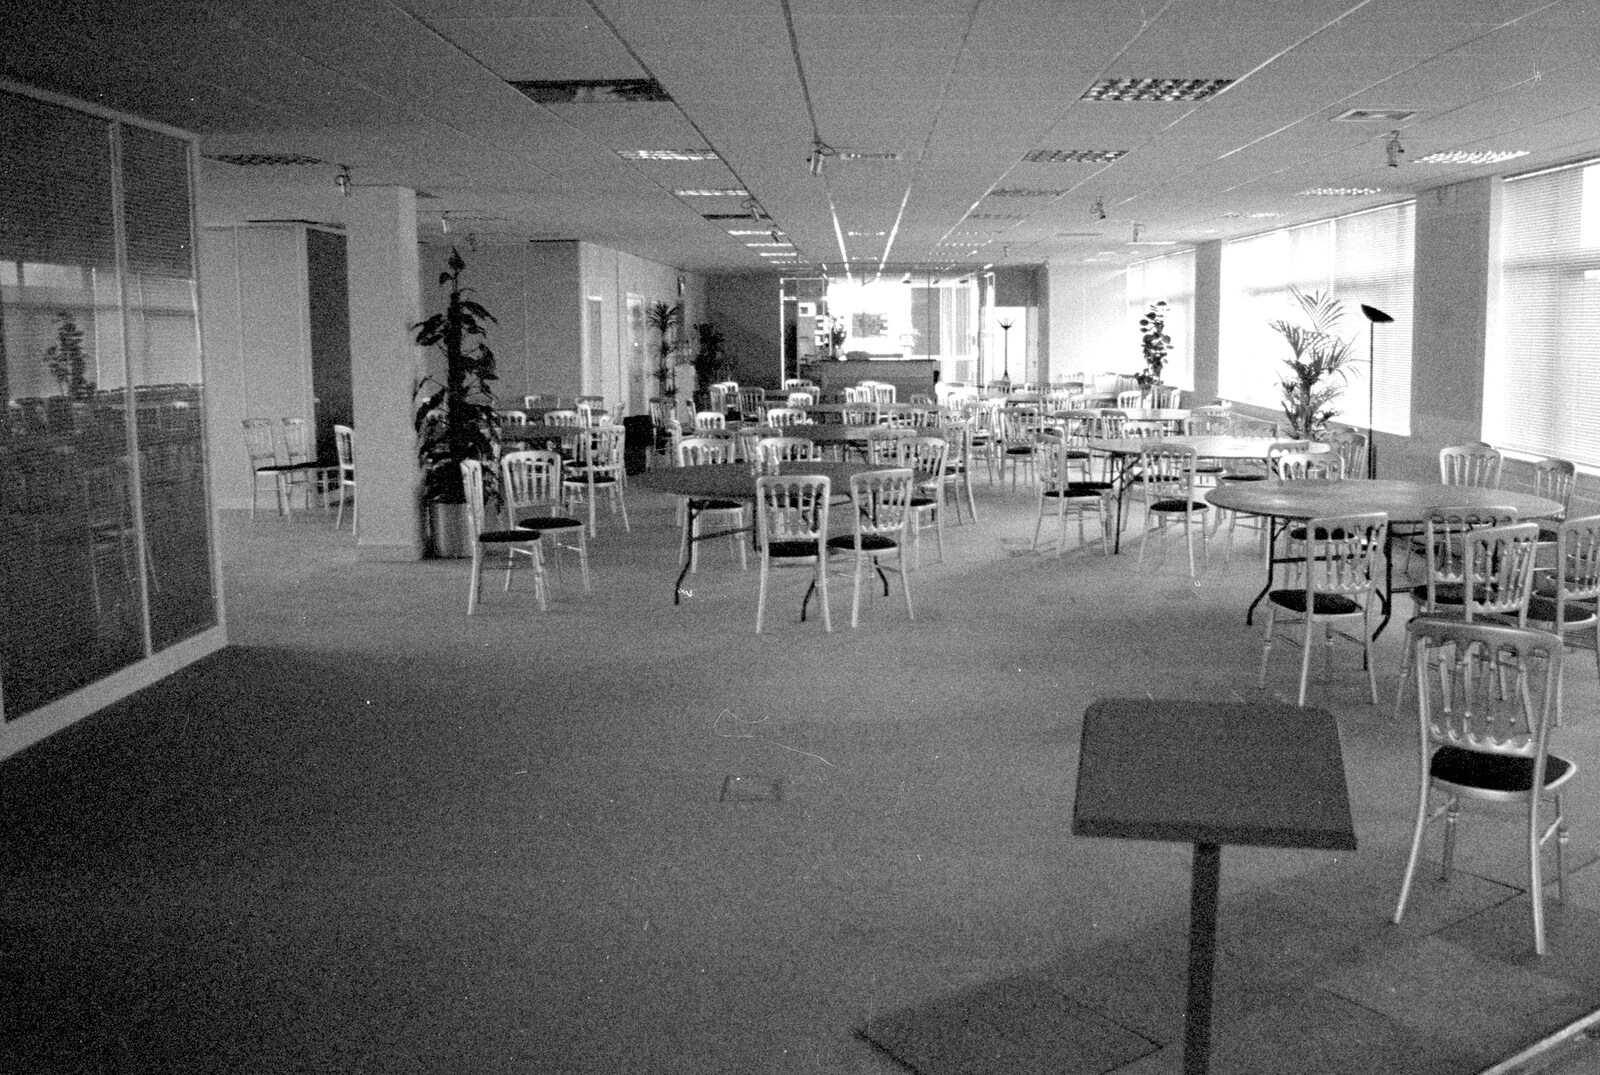 A room full of chairs from 3G Lab Moves Offices, Milton Road, Cambourne and Cambridge - 27th August 2001